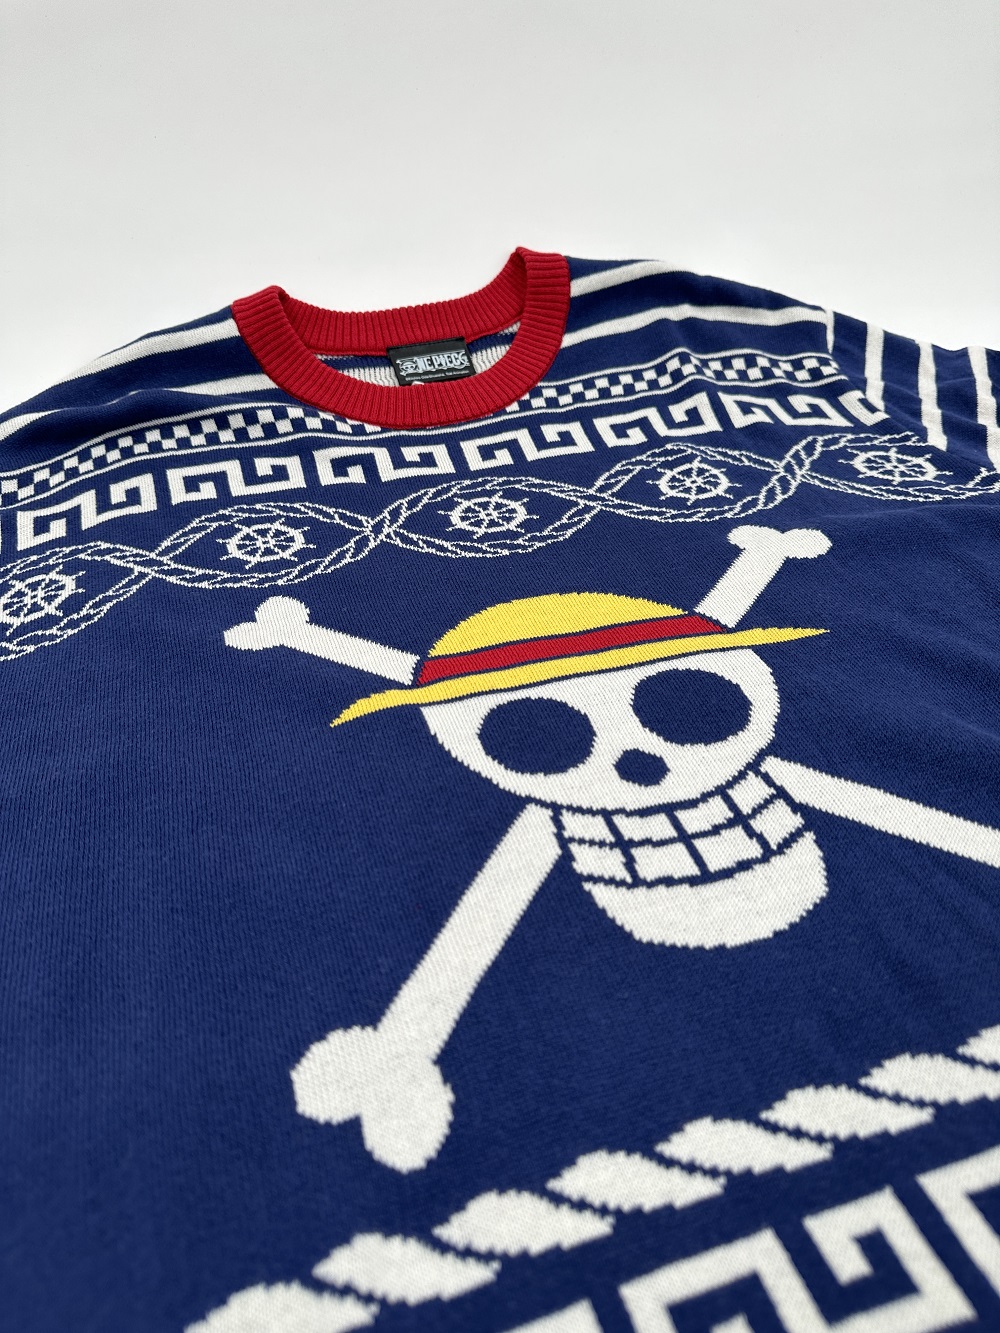 One Piece - Nautical Holiday Sweater - Crunchyroll Exclusive! image count 4